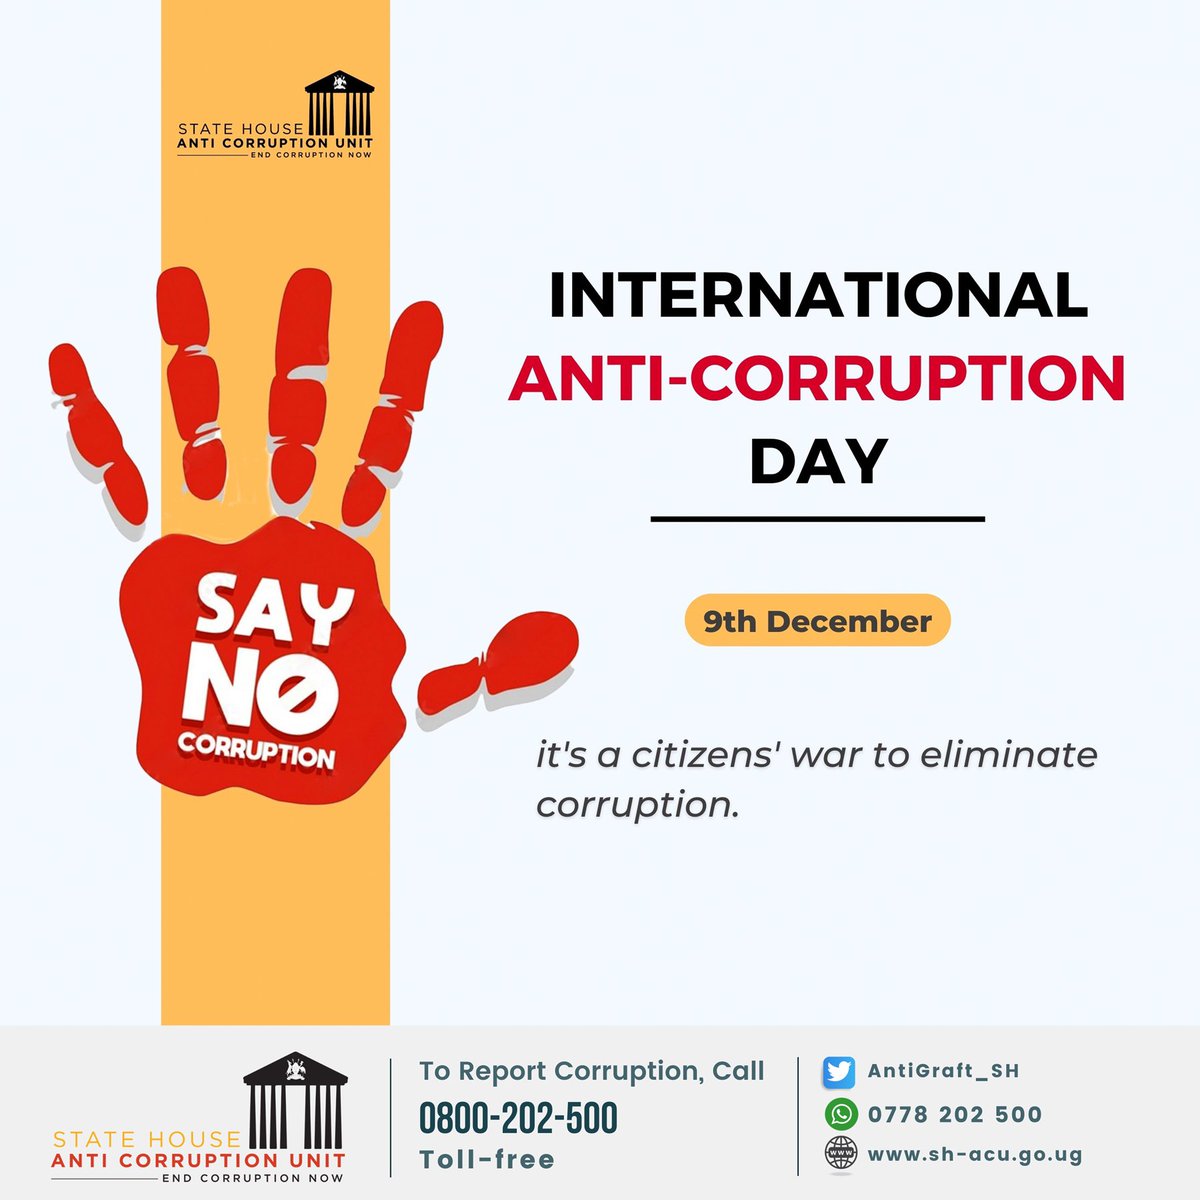 TODAY, Uganda joins the rest of the World to commemorate International Anti-corruption Day under the theme:

'Citizens must own the war to eliminate corruption, It is their war!'

#CorruptionIsWinnable
#SeeSomethingSaySomething 
#AntiCorruptionDay